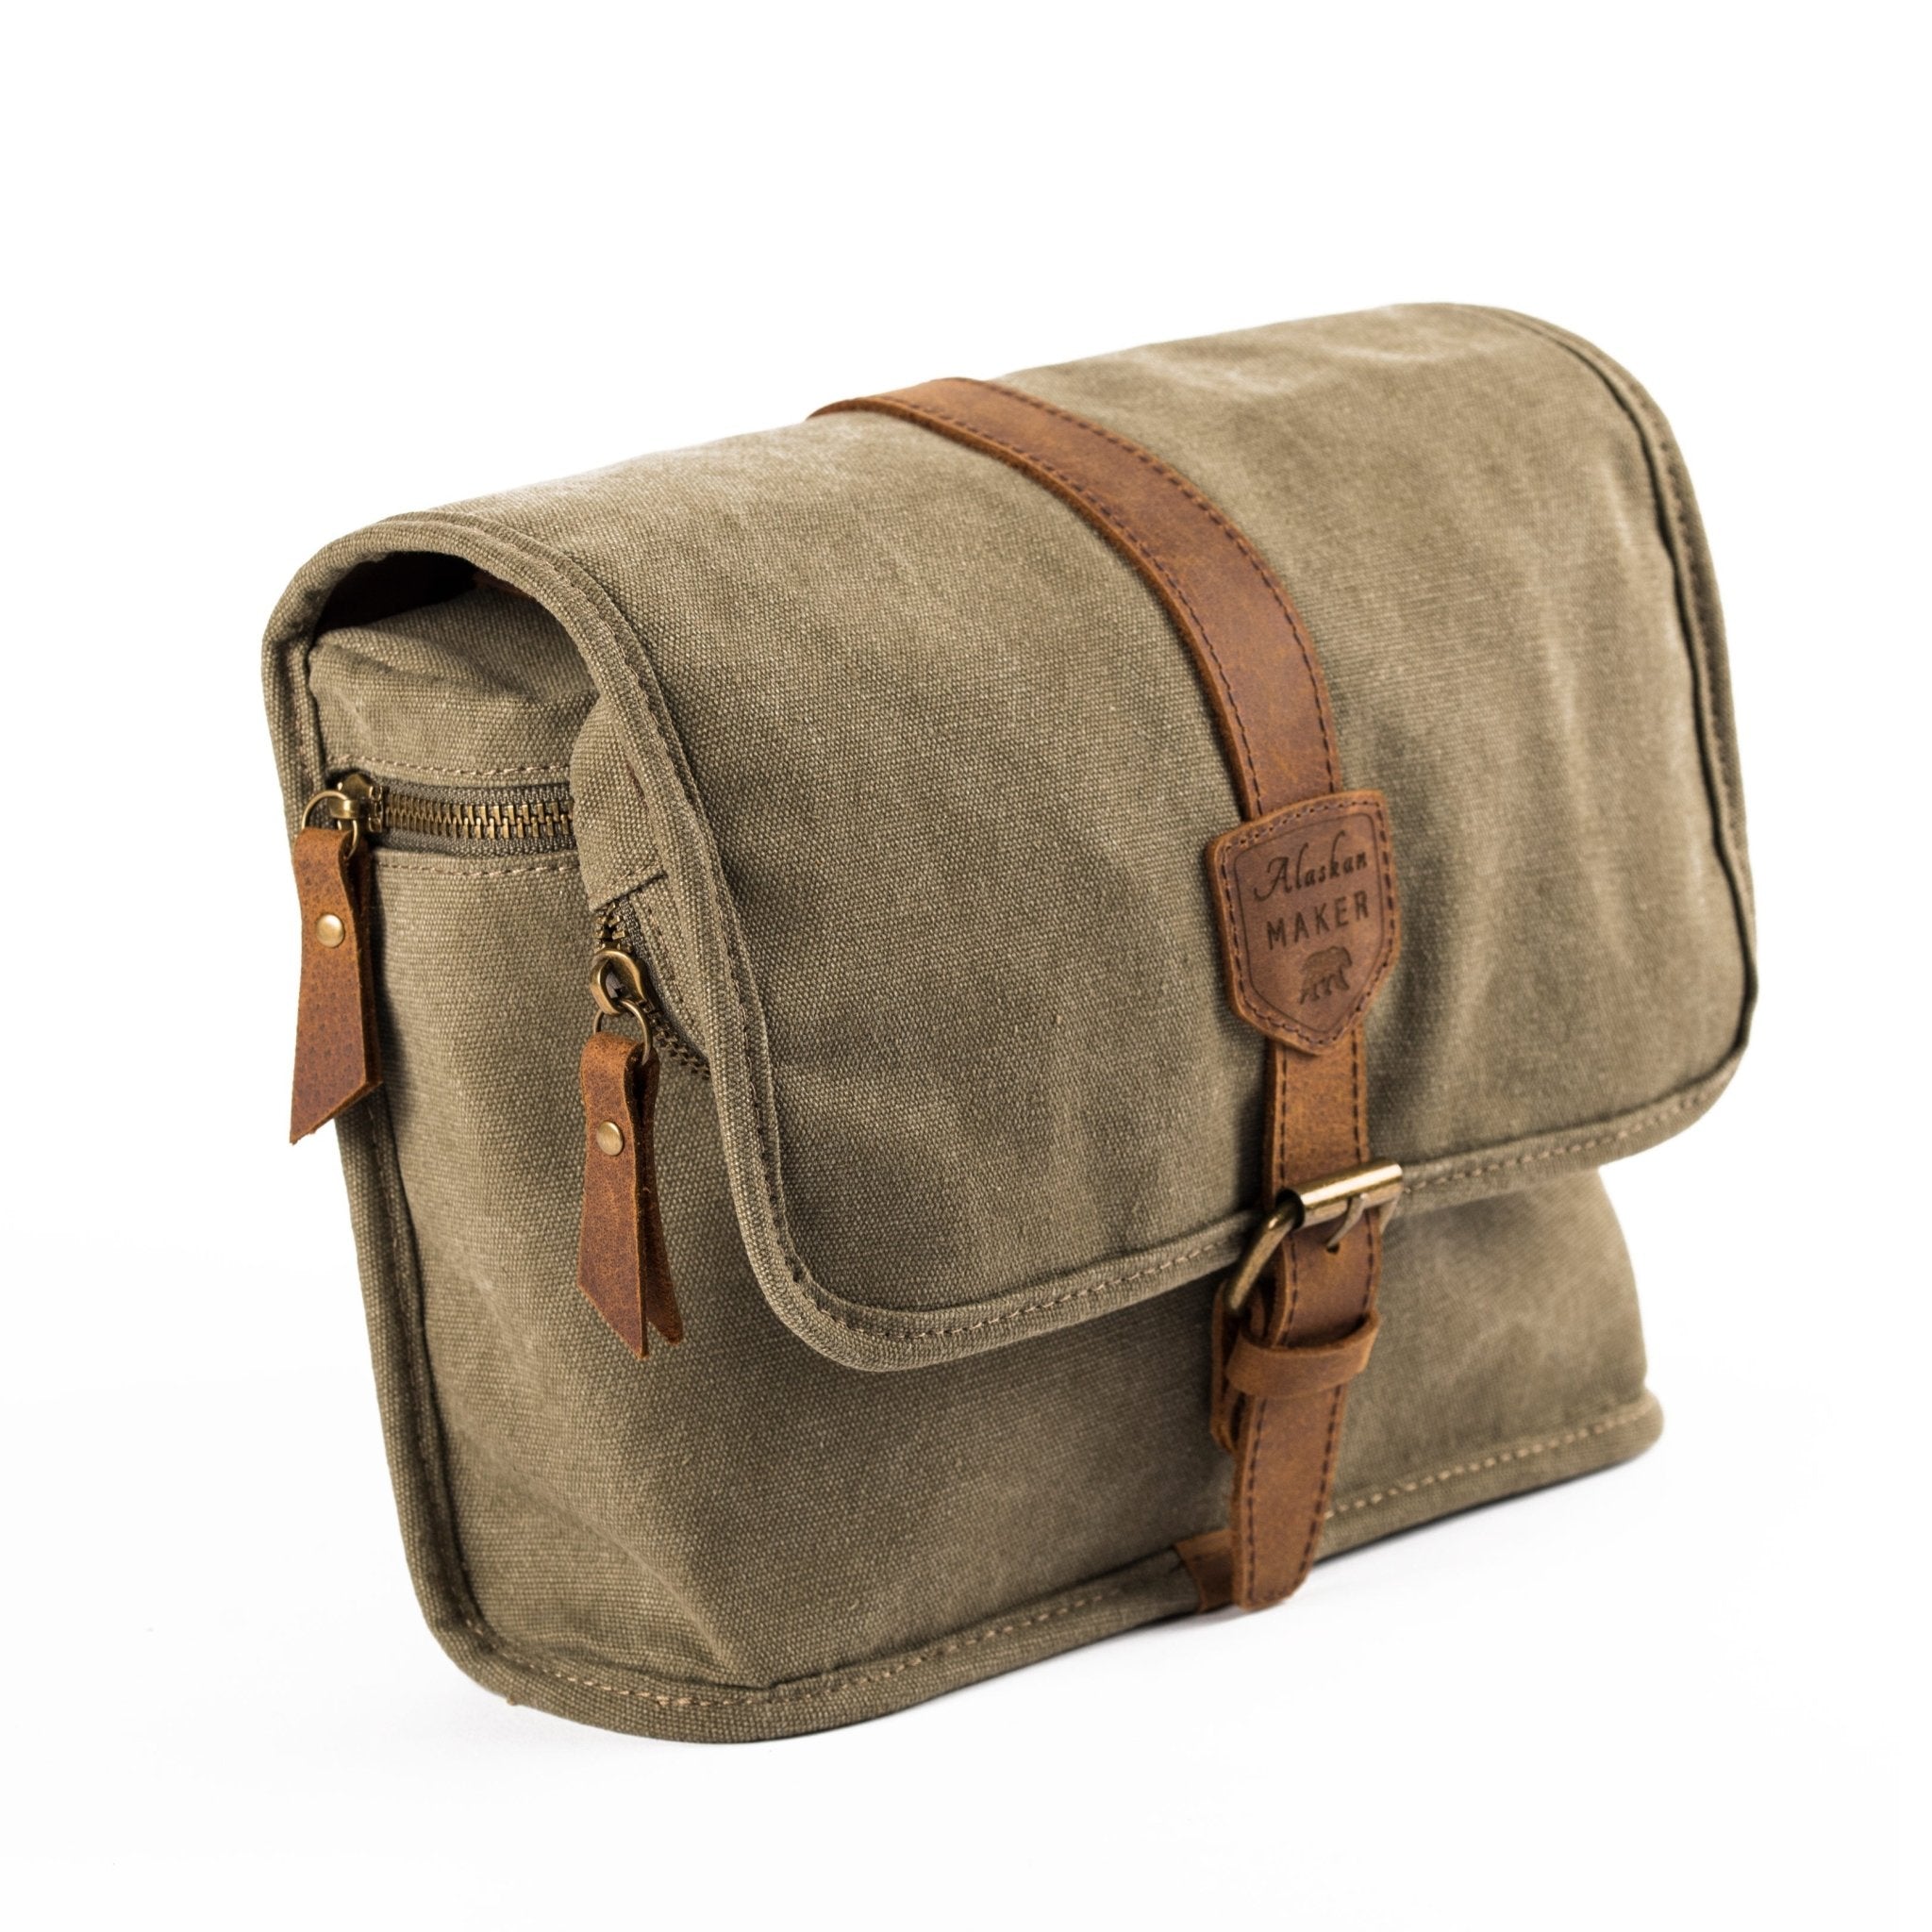 Canvas Hanging Wash Bag. Great For Home & Travel - Life of Riley